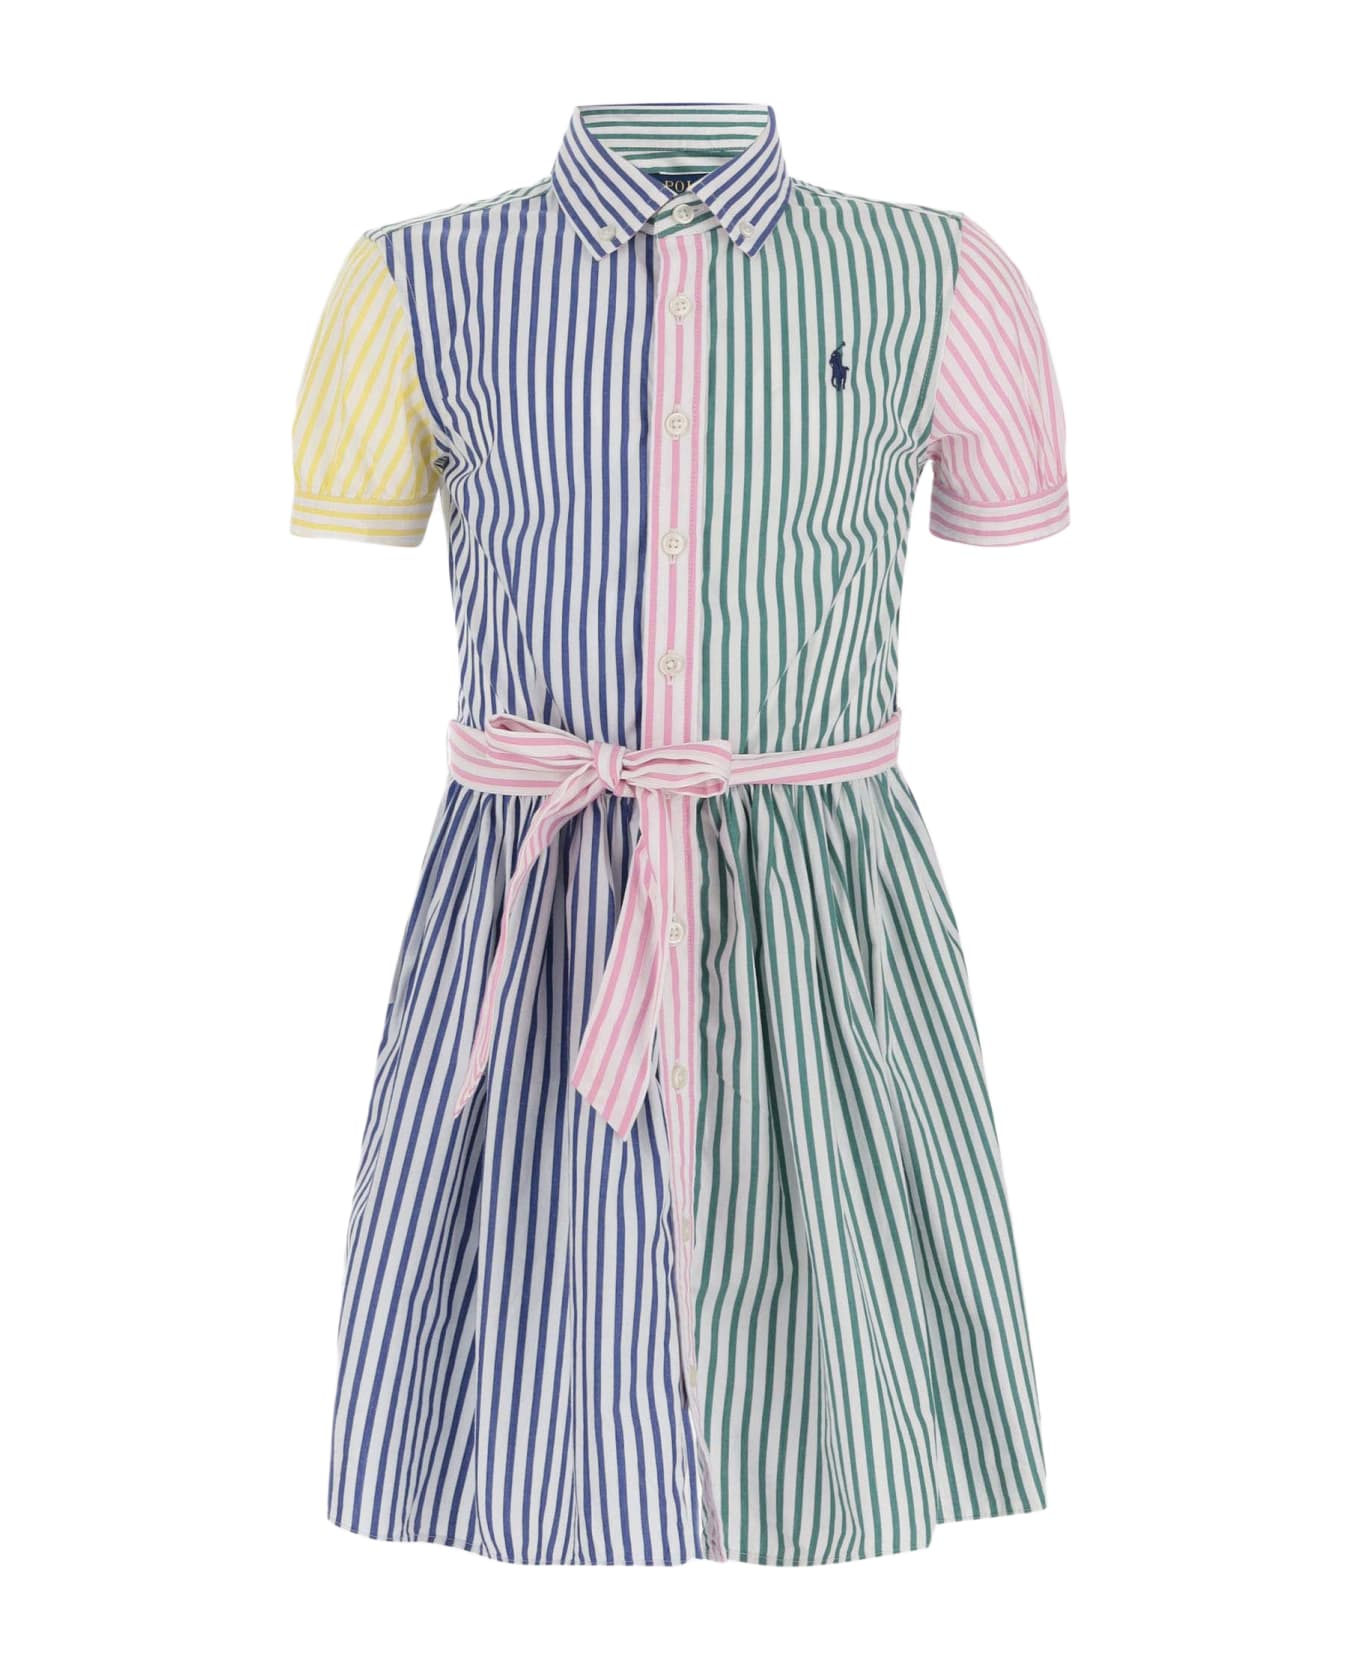 Polo Ralph Lauren Cotton Dress With Striped Pattern - Red